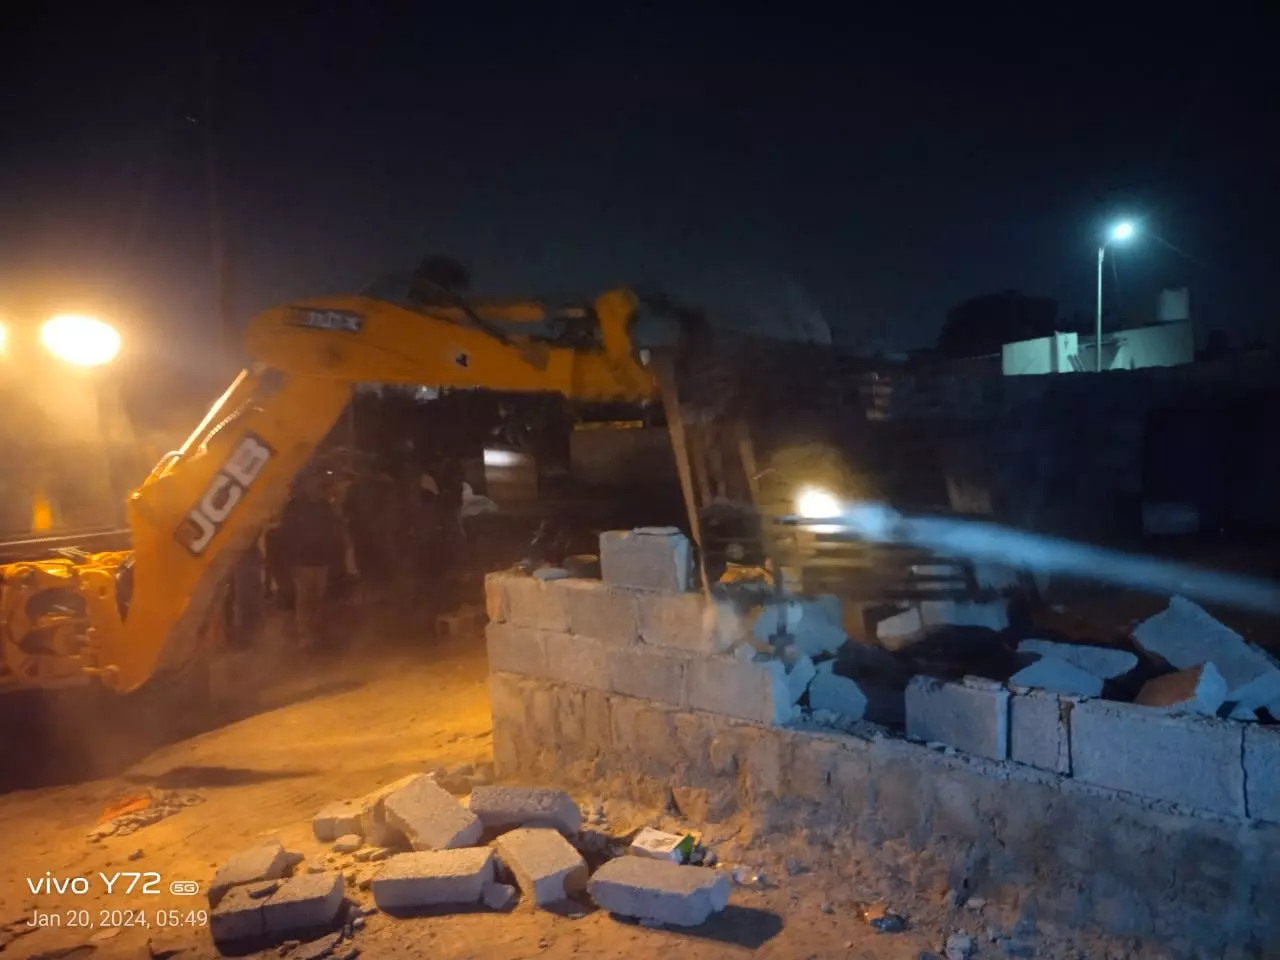 GHMC bulldozed 15 unauthorised constructions built on government land